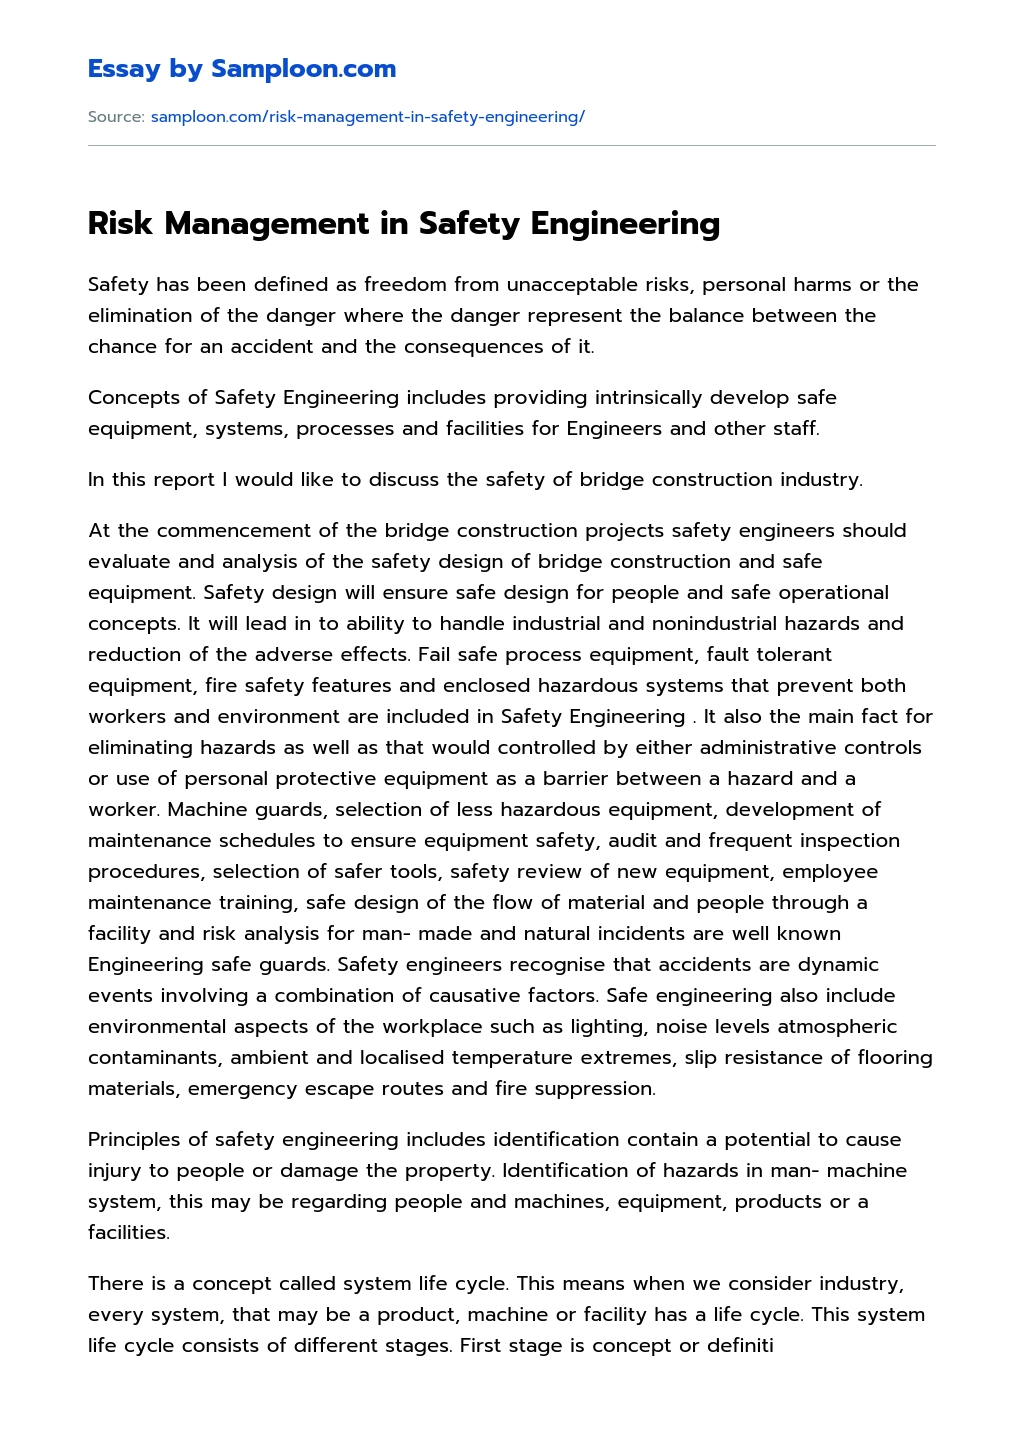 Risk Management in Safety Engineering essay